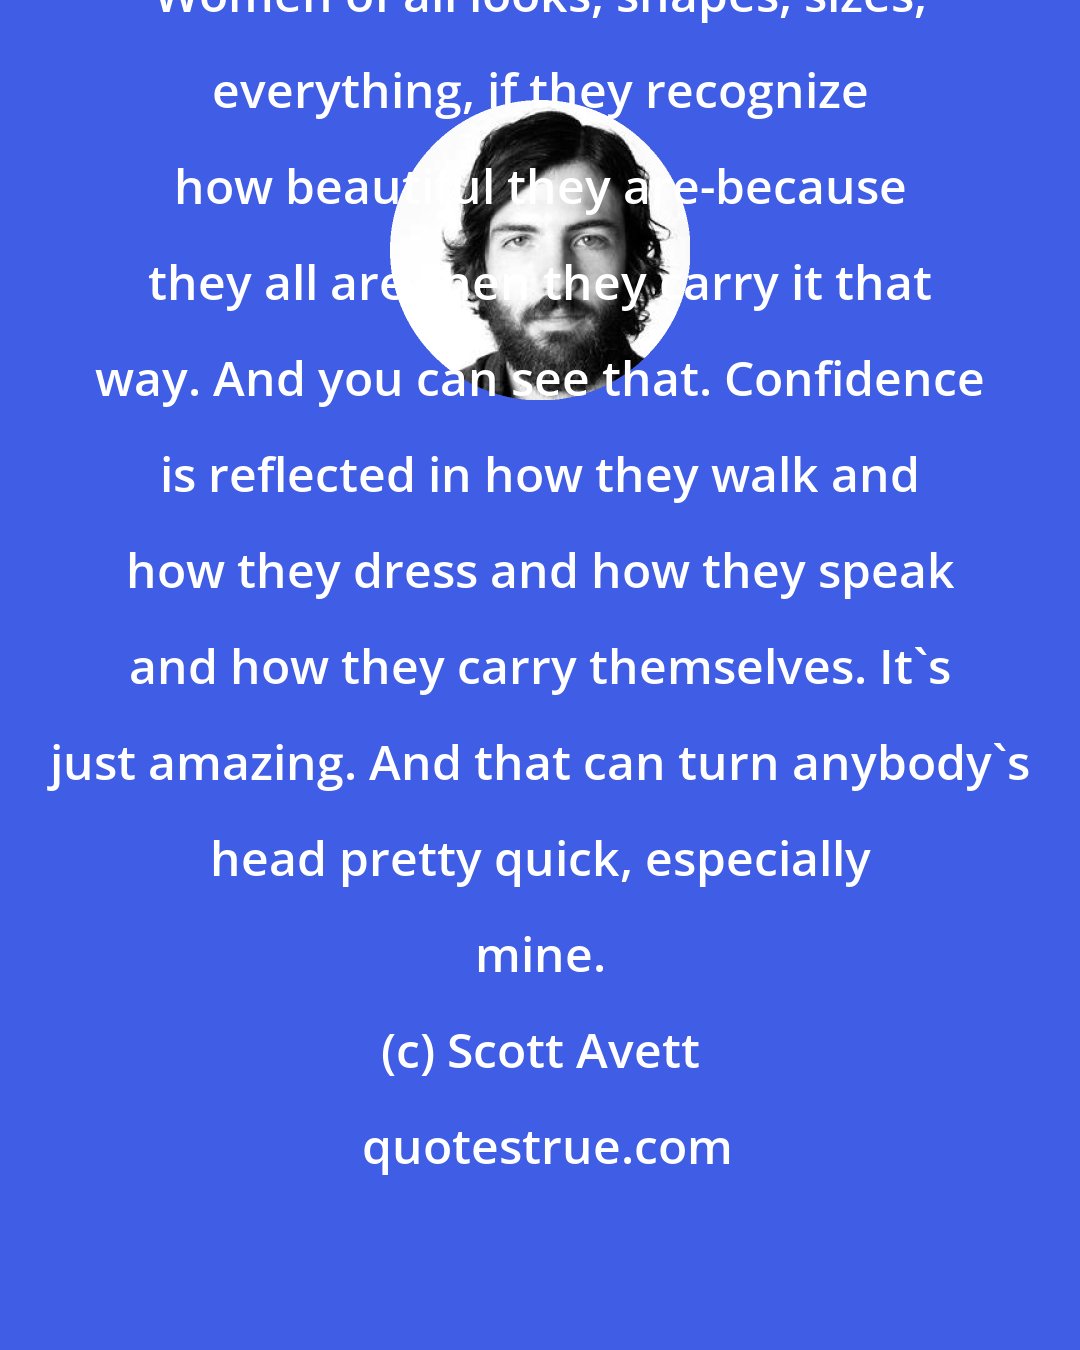 Scott Avett: Women of all looks, shapes, sizes, everything, if they recognize how beautiful they are-because they all are-then they carry it that way. And you can see that. Confidence is reflected in how they walk and how they dress and how they speak and how they carry themselves. It's just amazing. And that can turn anybody's head pretty quick, especially mine.